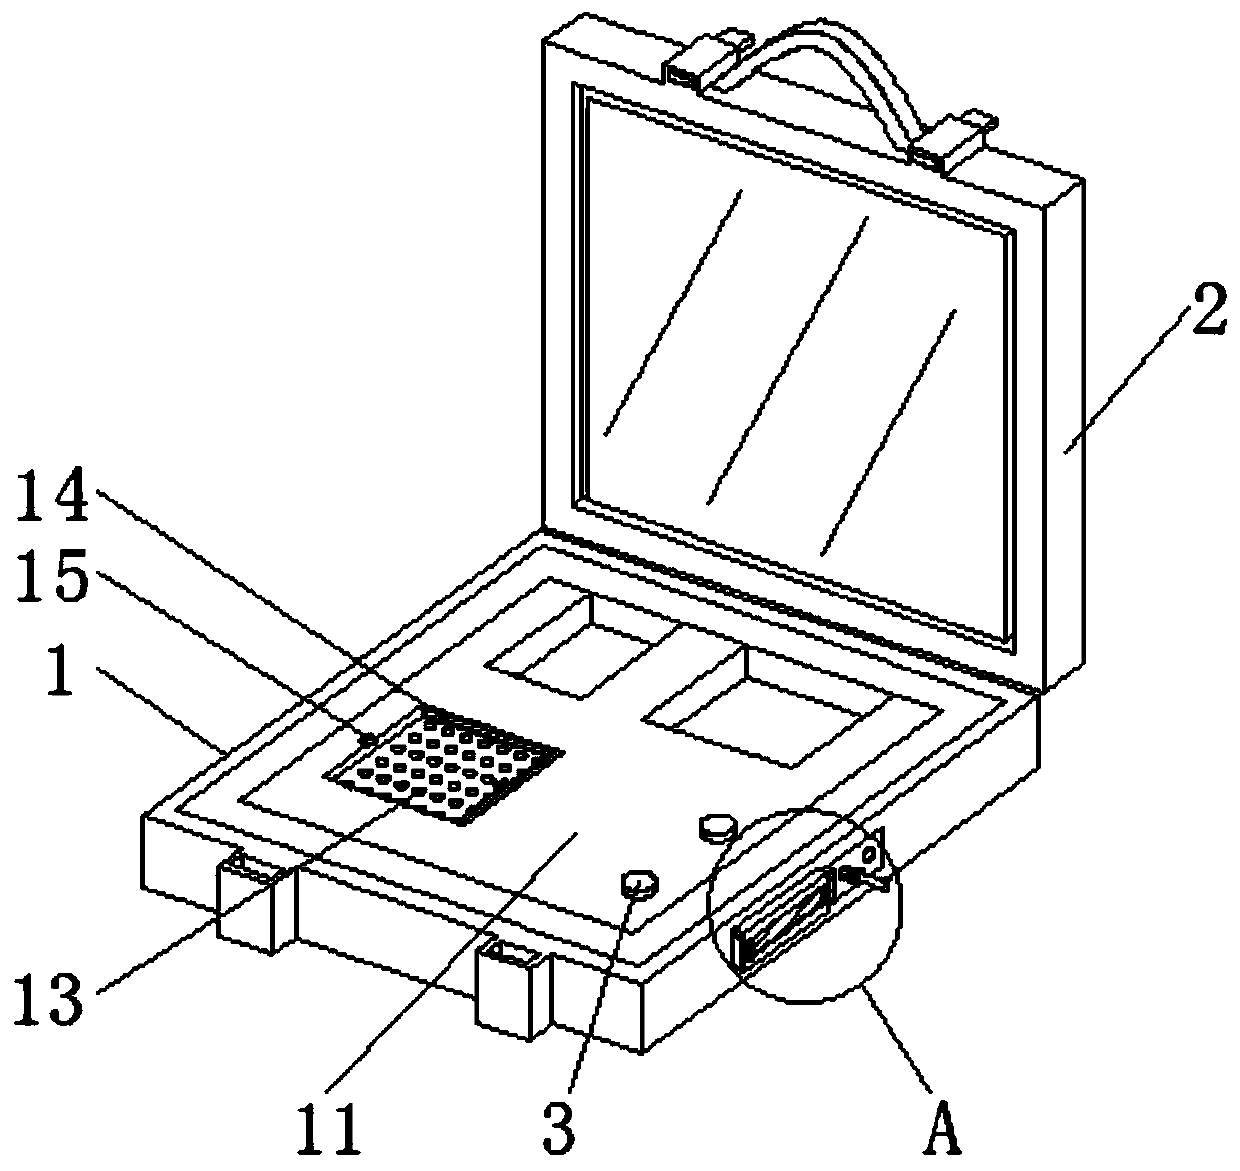 A computer software and hardware detection device convenient to move and adjust